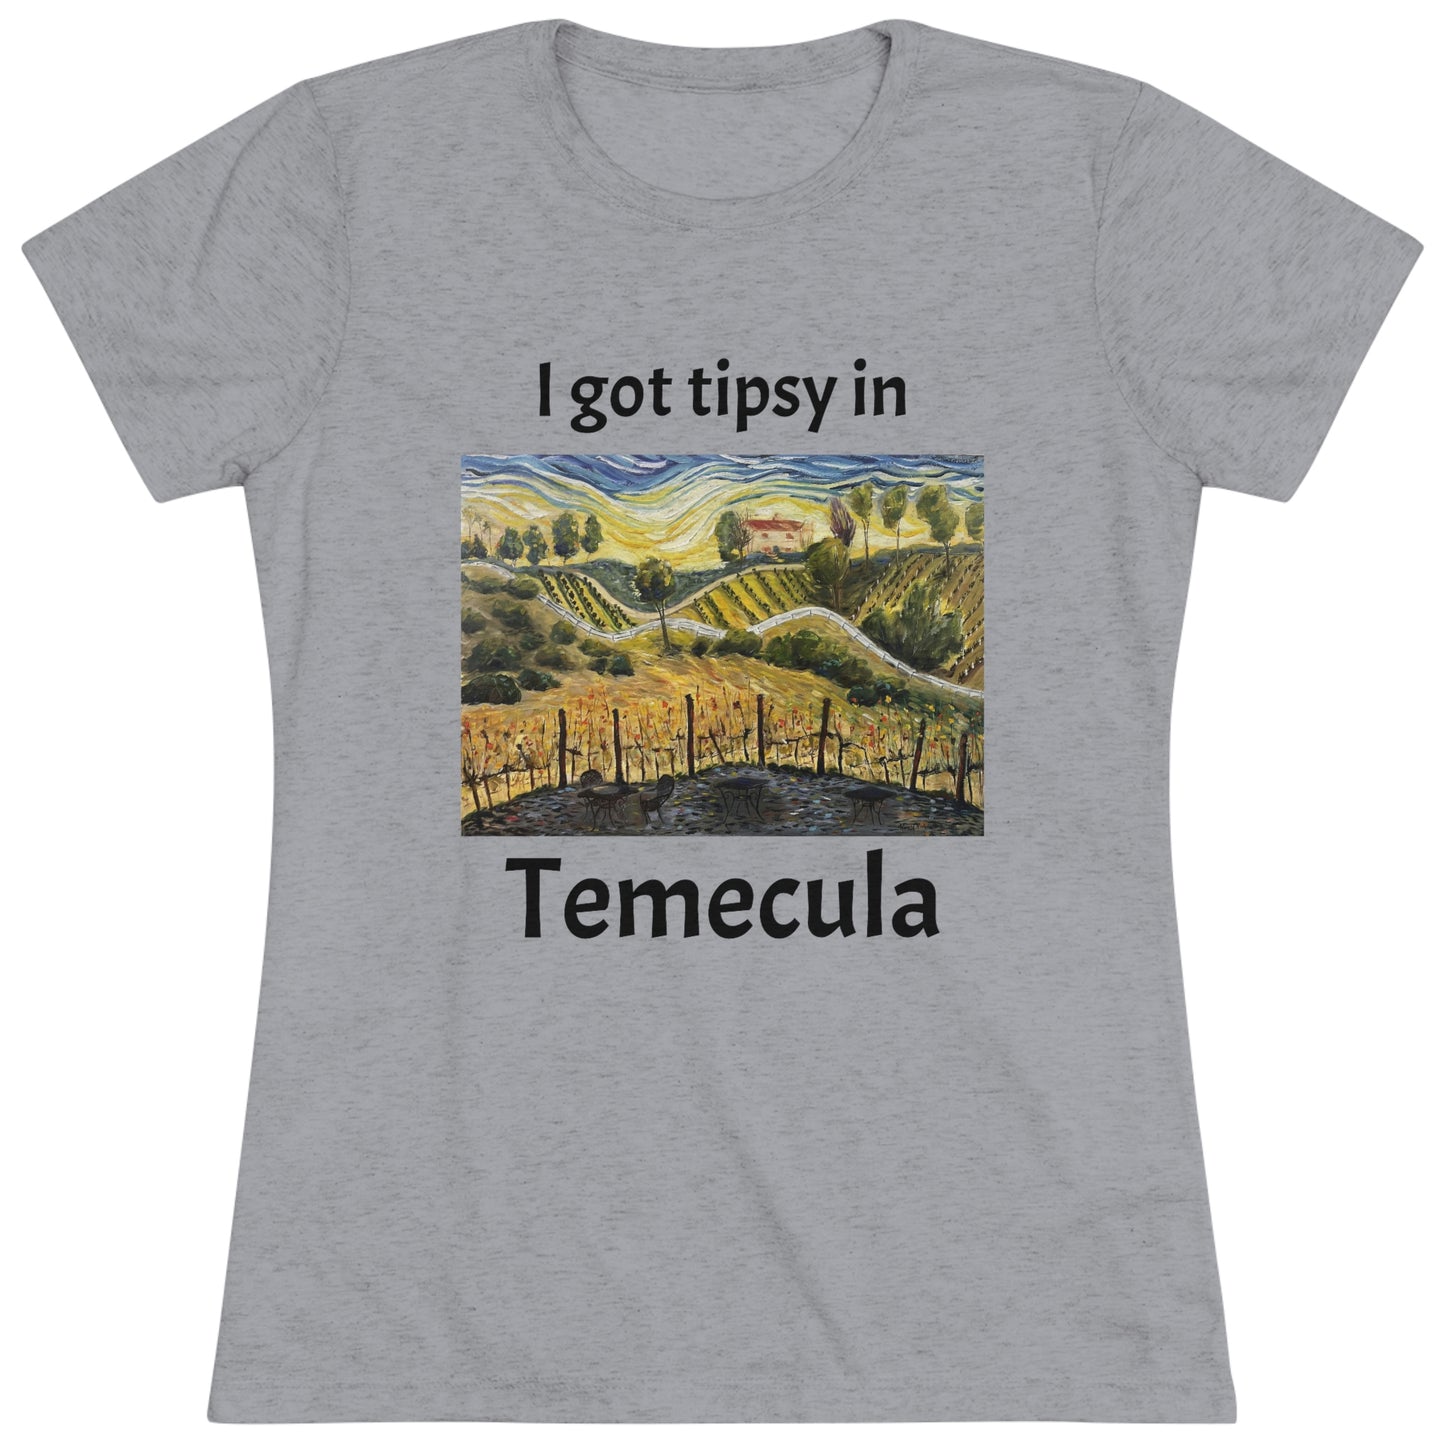 I got tipsy in Temecula Women's fitted Triblend Tee Temecula tee shirt souvenir "Sunset at the Villa" GBV Winery